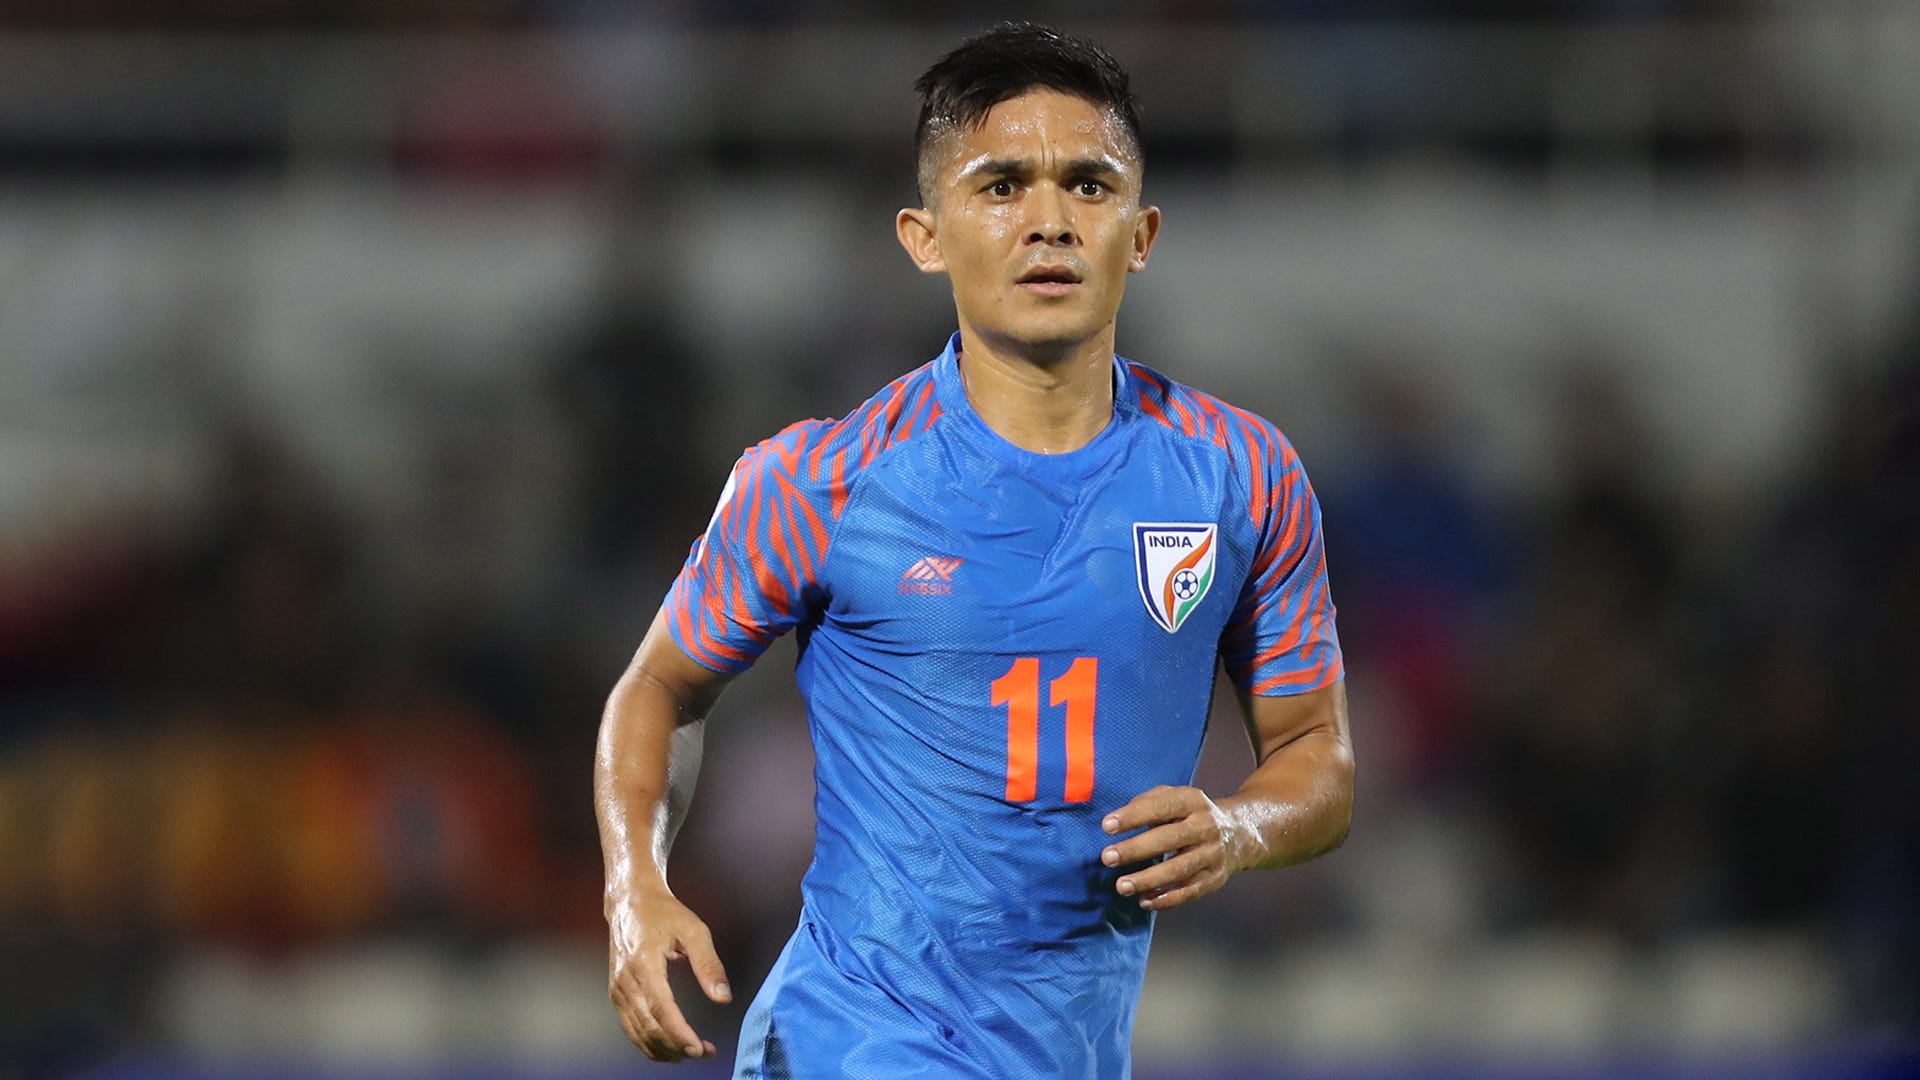 10 facts about Sunil Chhetri you didn't know | Goal.com India